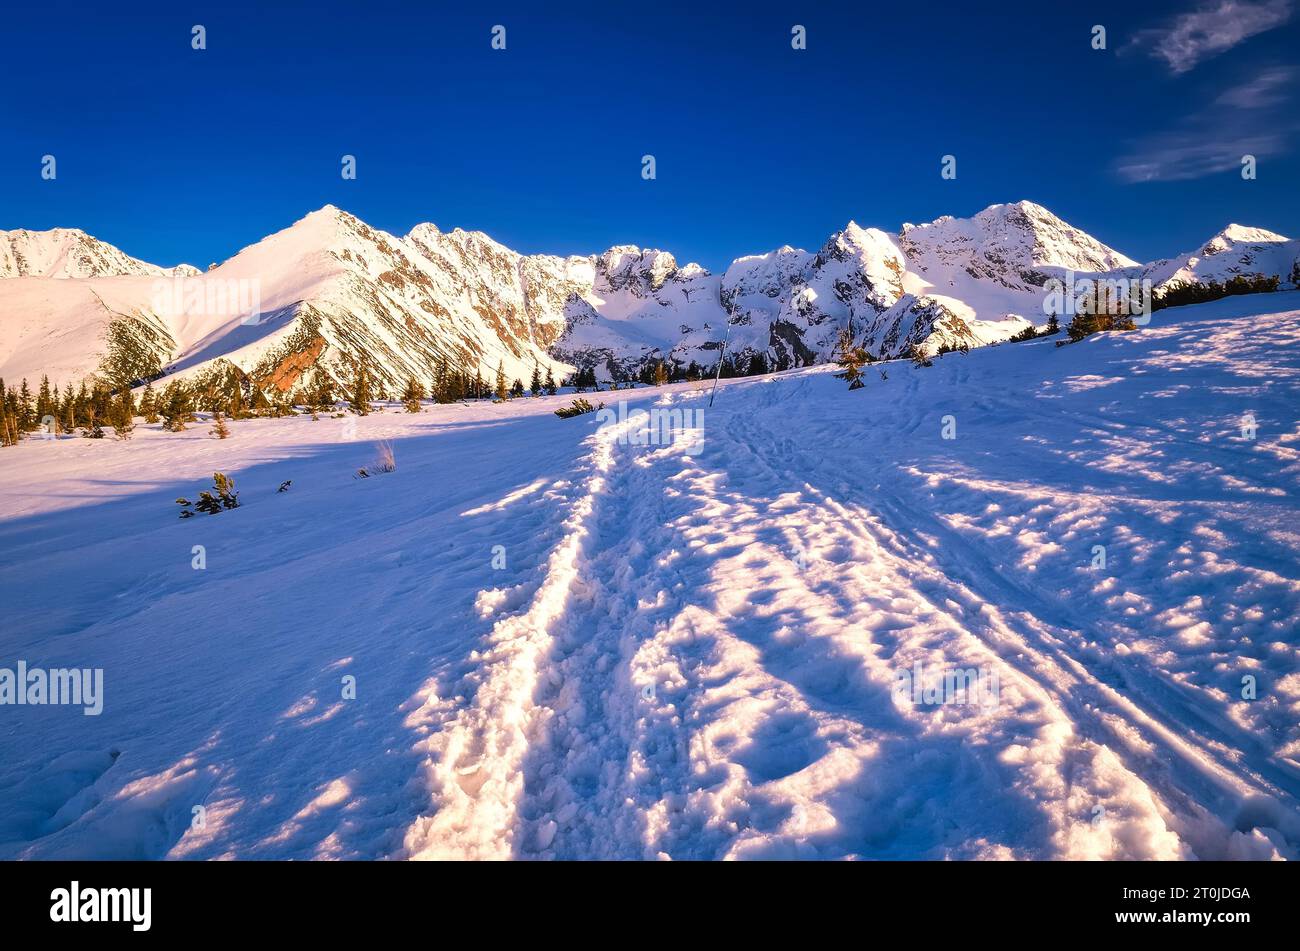 Beautiful winter landscape in the Polish mountains. Snowy trail leading to the Gasienicowa valley in National Park in the Tatra Mountains, Poland. Stock Photo